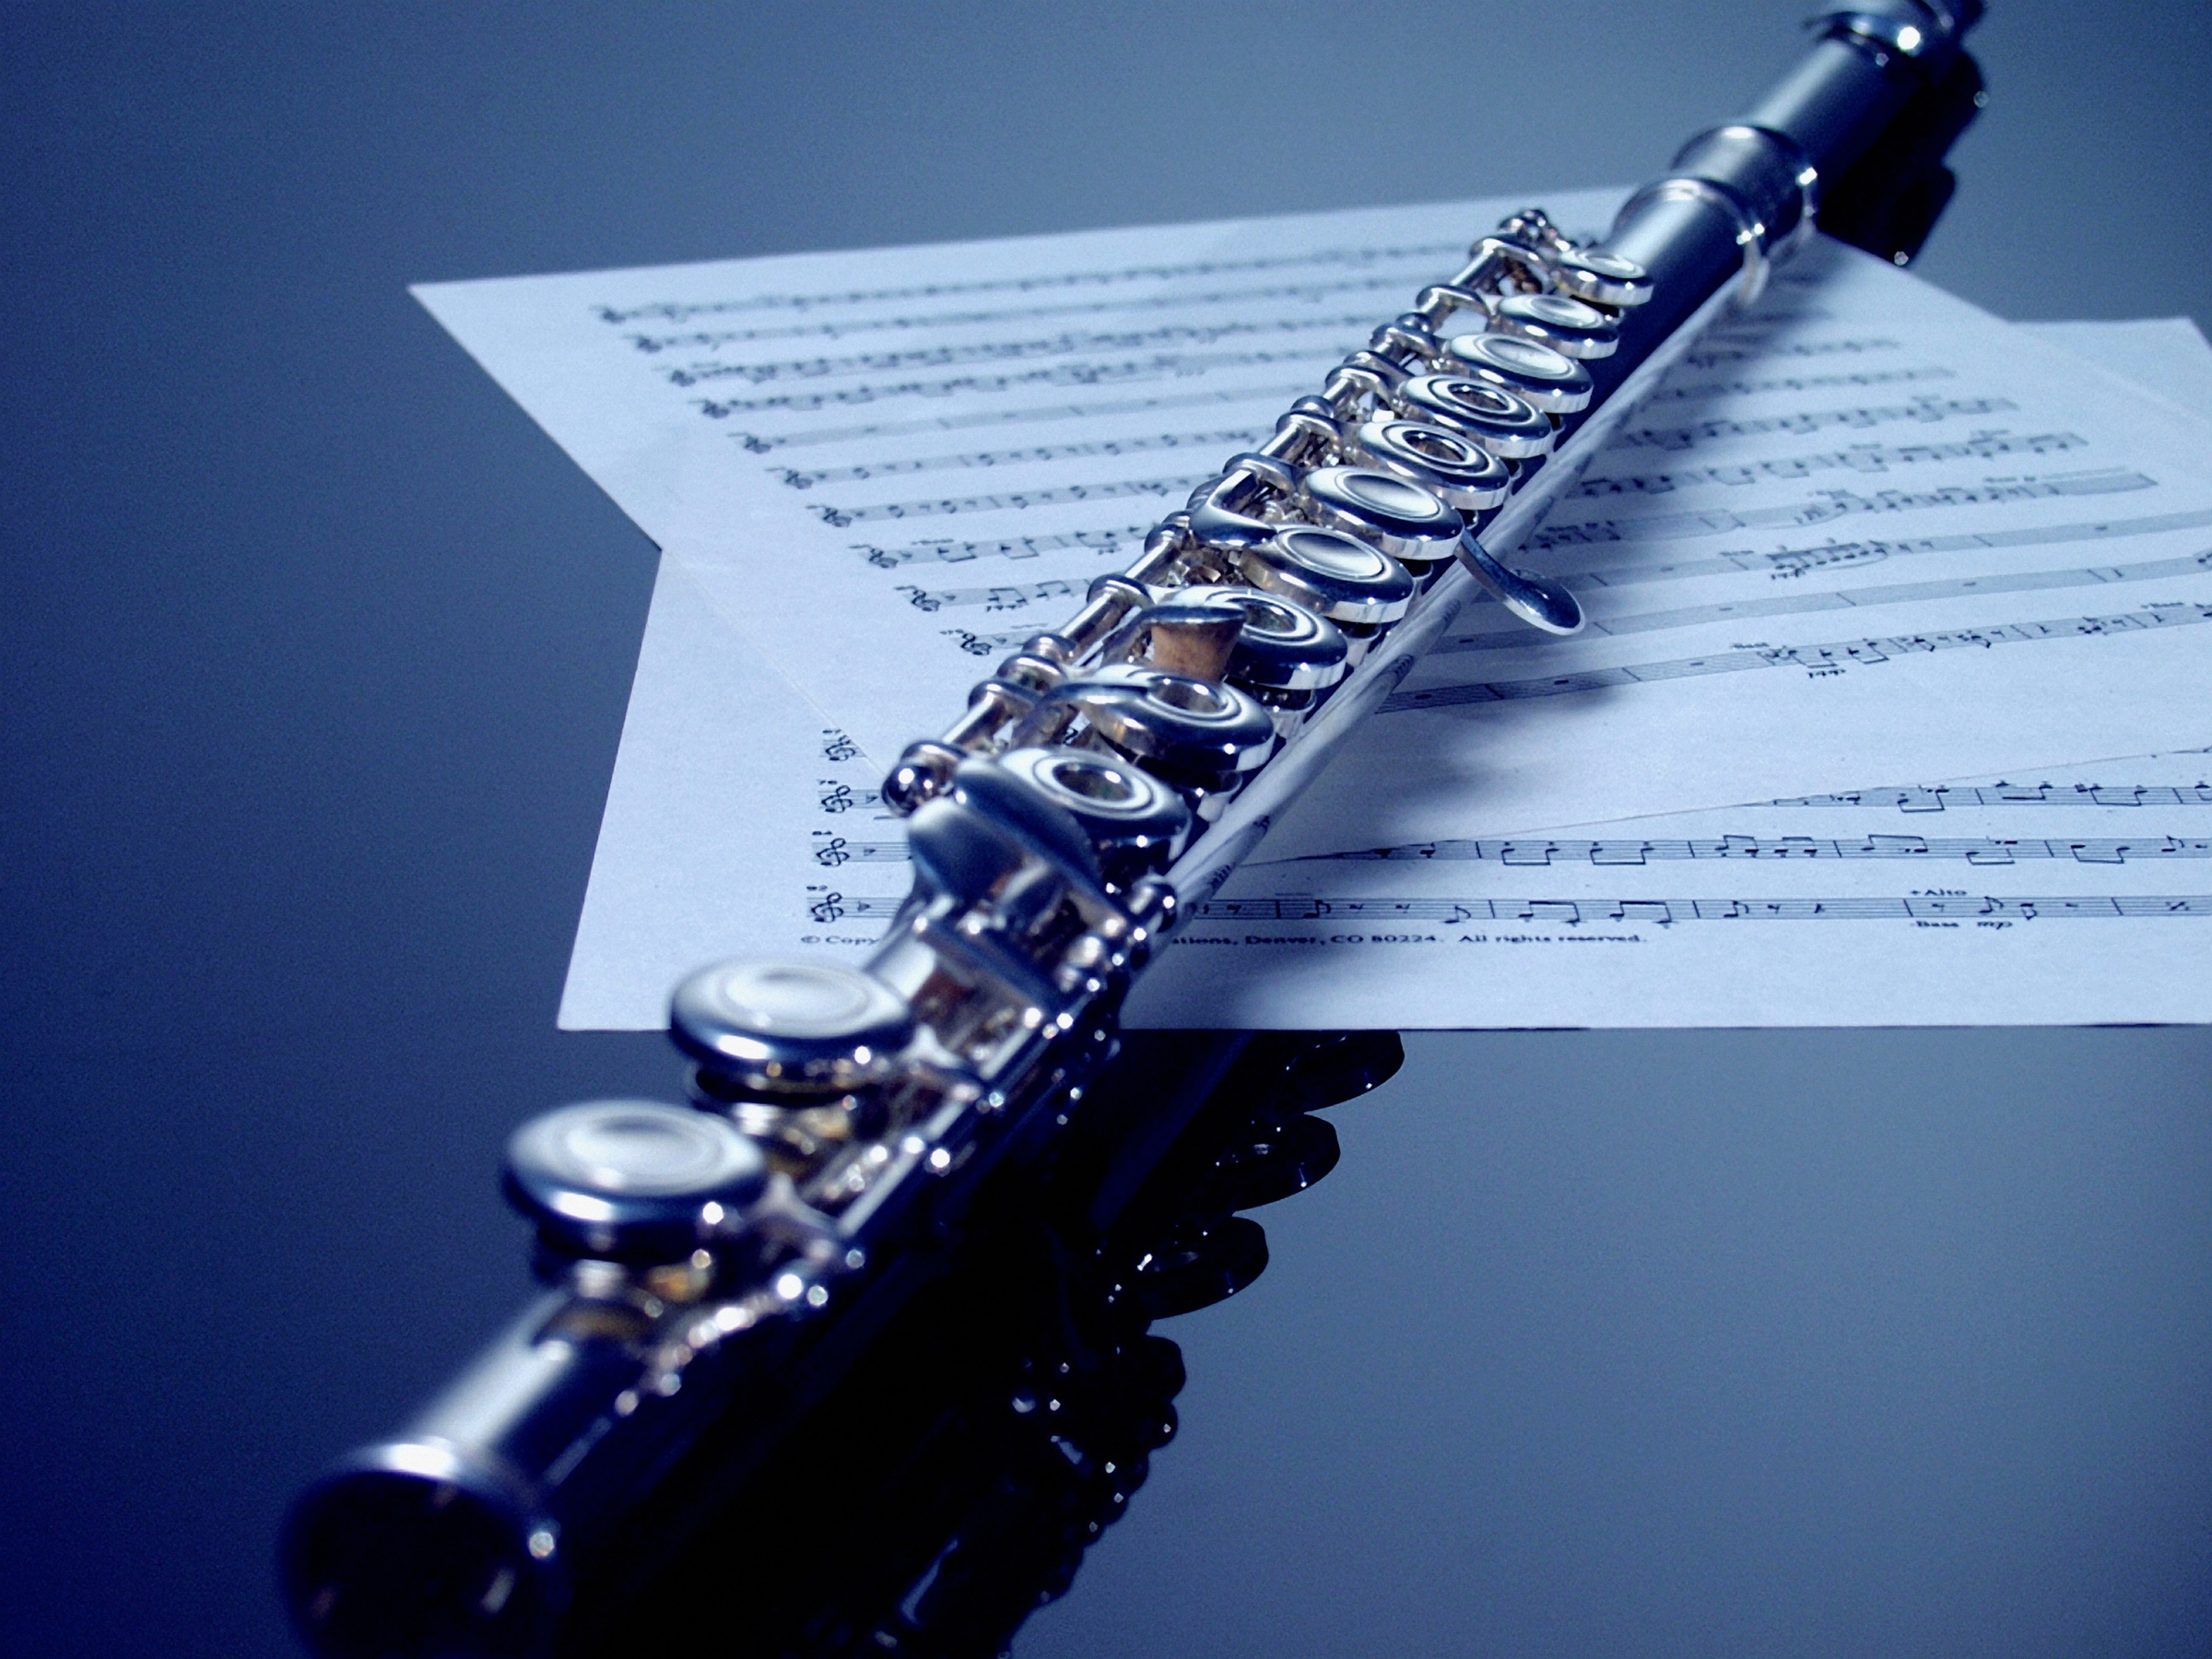 Flute on sheet music, close-up